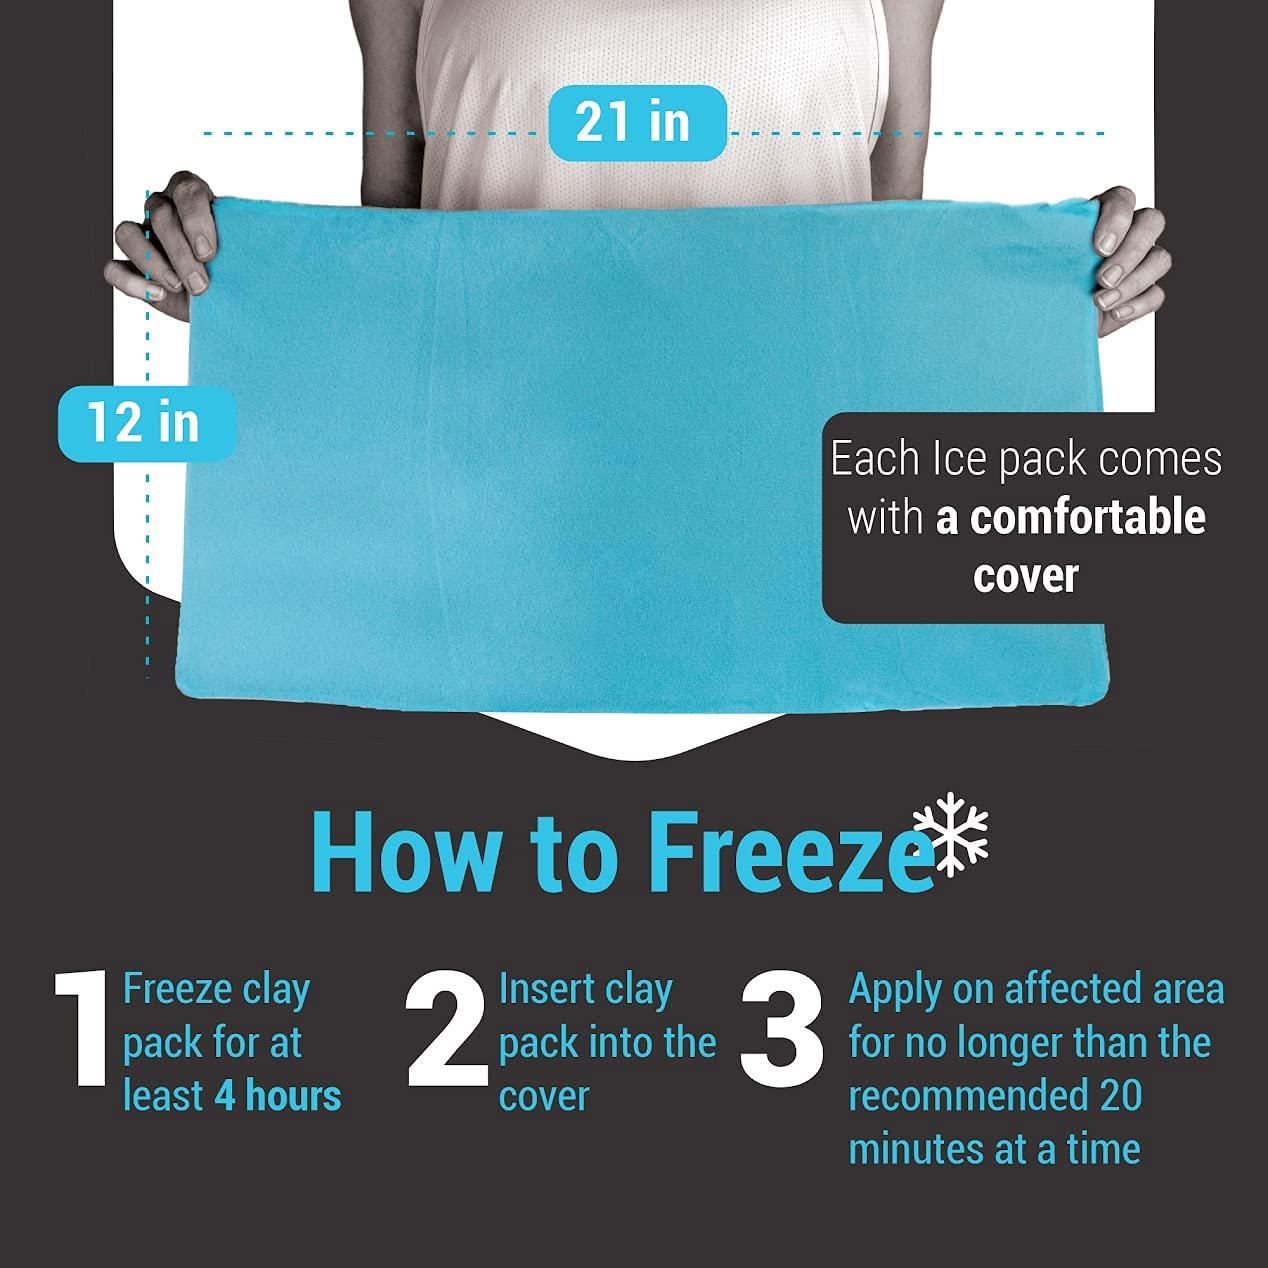 Stay-Put® Cold Therapy Wrap Medium (8” x 12”) – Reusable Ice Packs with  Straps, Cold Pack Compress for Arms, Shins, Calves, and Smaller Joint Pain